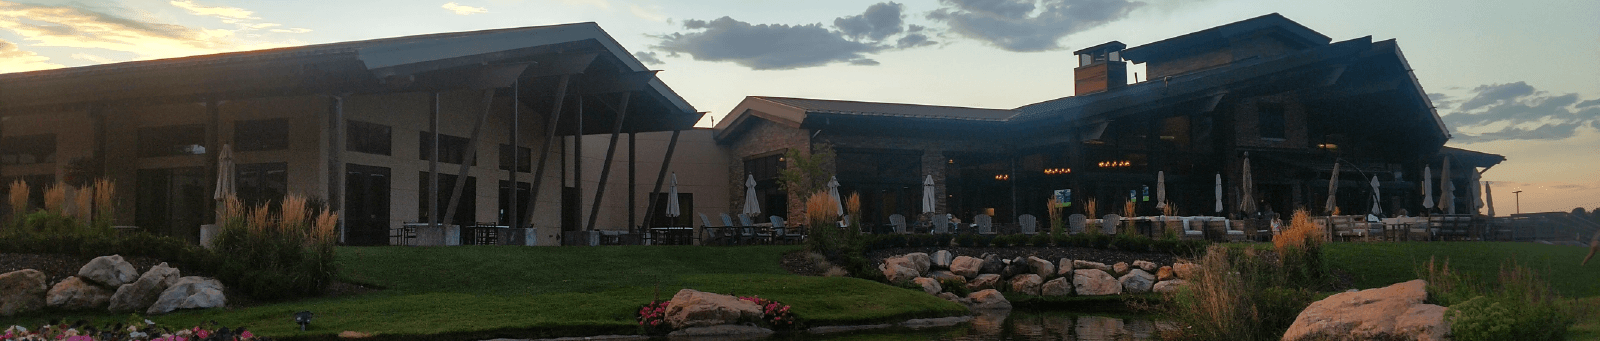 Willow Creek Country Club - Salt Lake City Event Venues